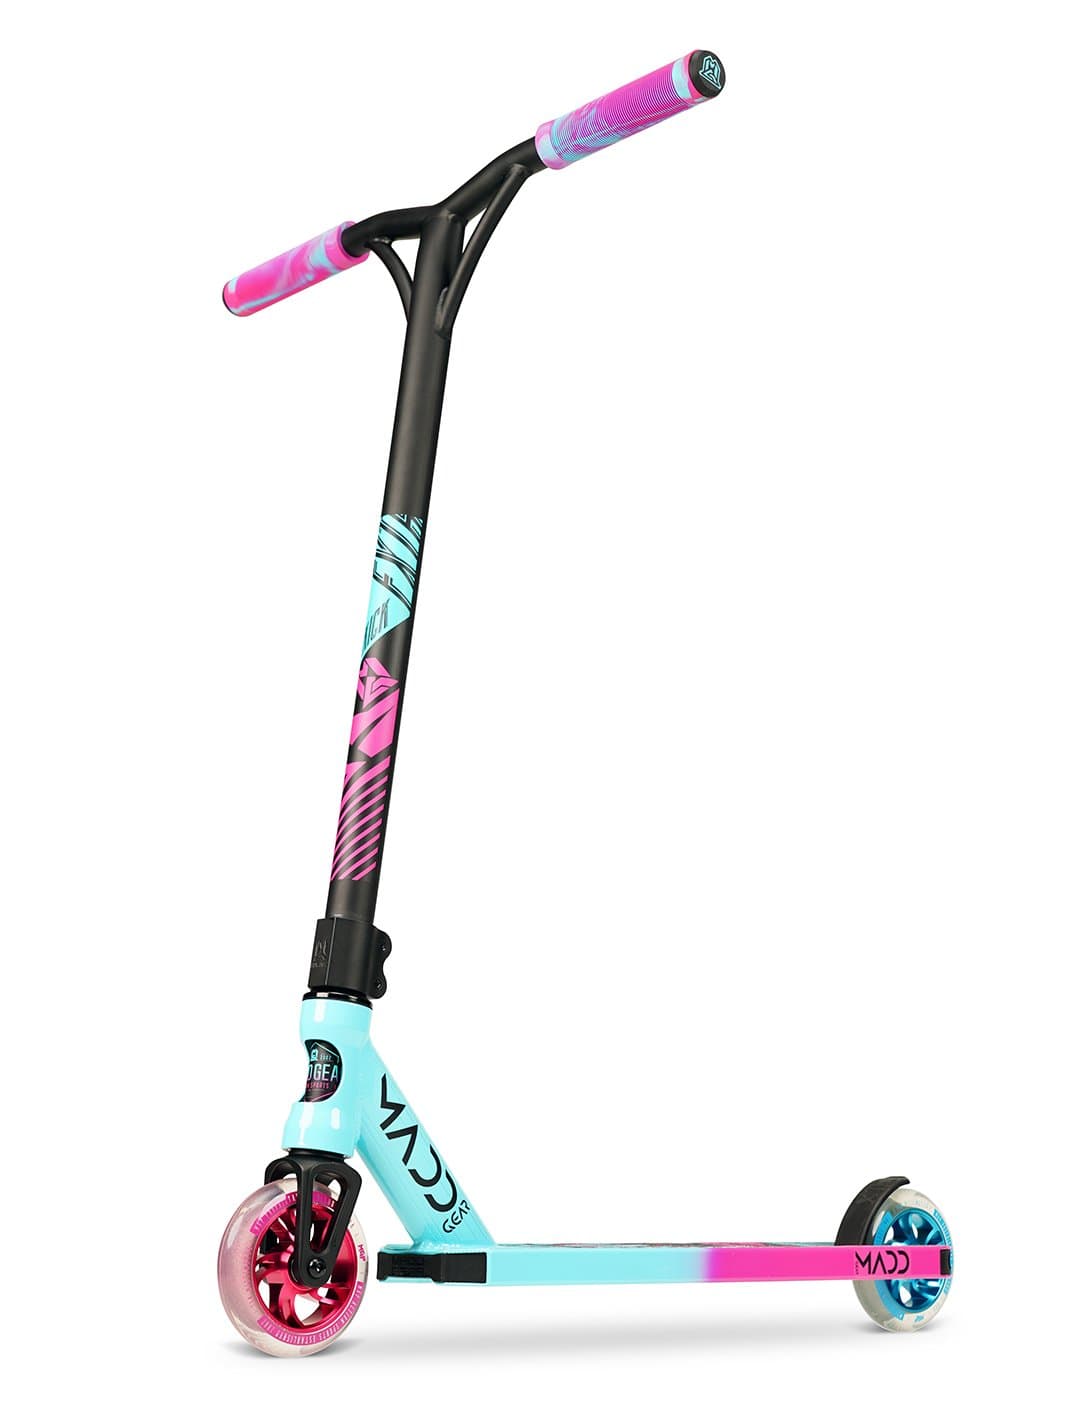 Smooth riding MGP Kick Extreme Stunt Scooter Complete High Quality Razor Pro Trick Skate Park Mad Teal Pink Wheels